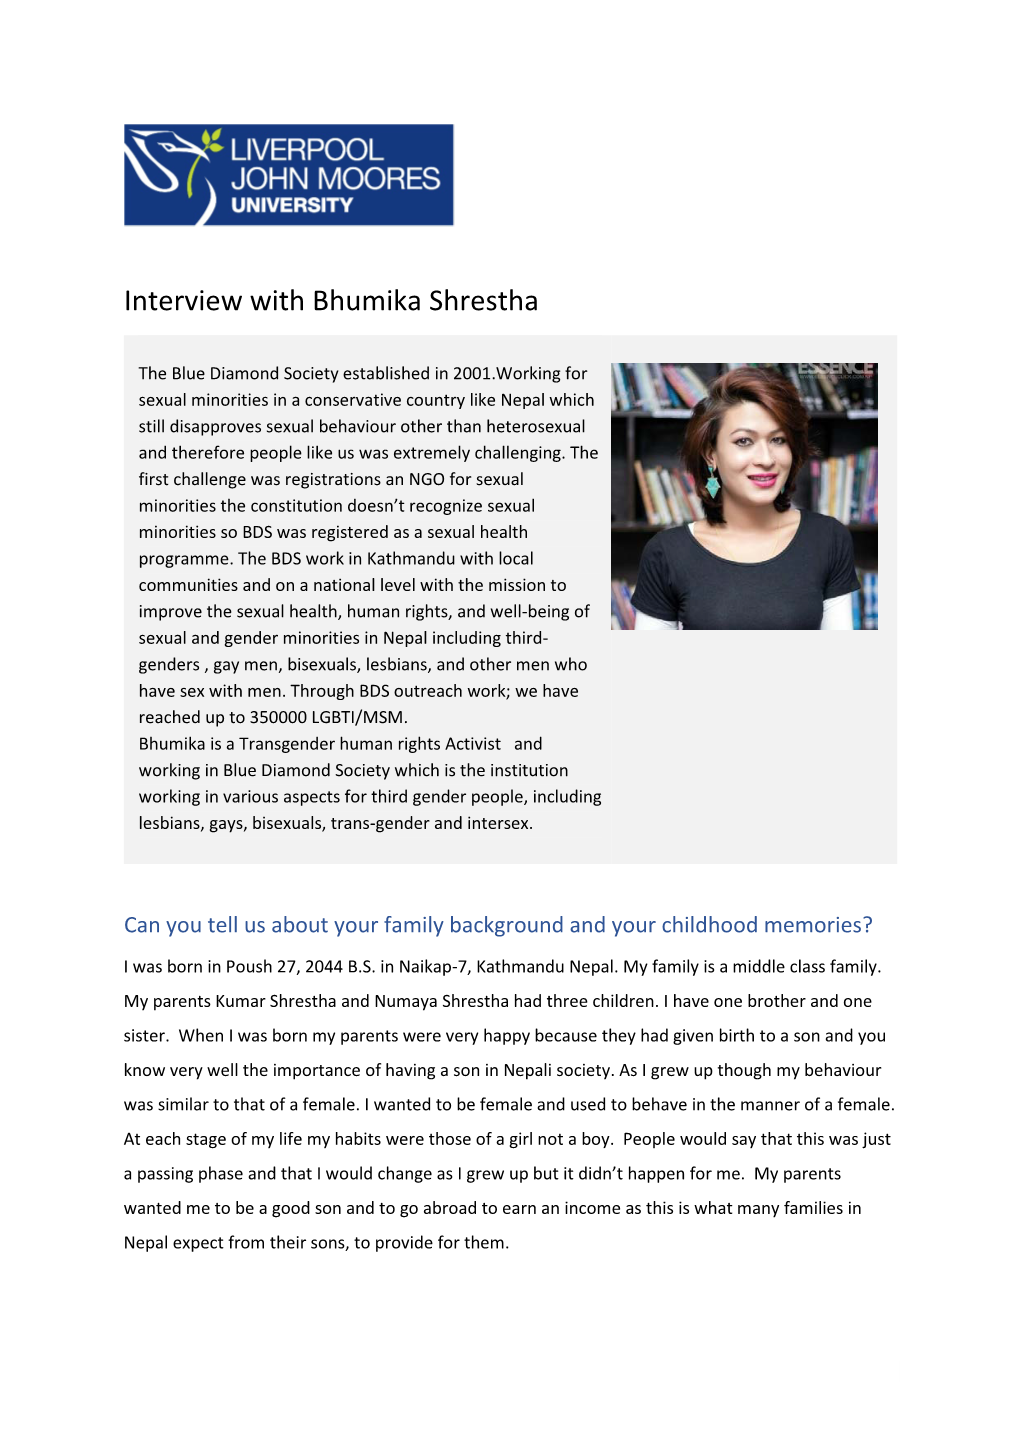 Interview with Bhumika Shrestha